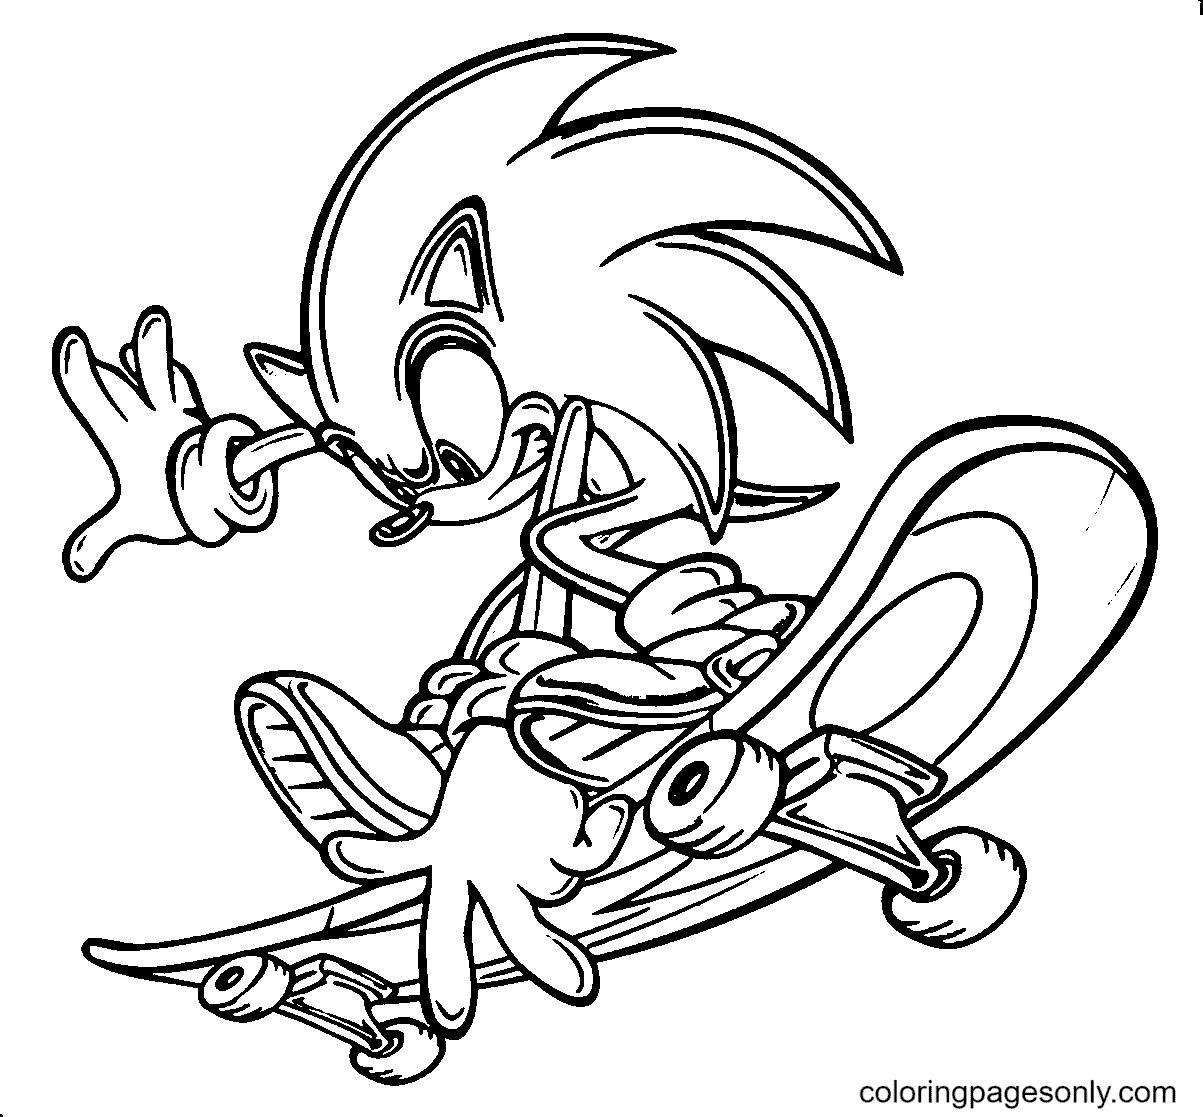 Sonic Skateboarding Coloring Pages   Sonic The Hedgehog Coloring ...